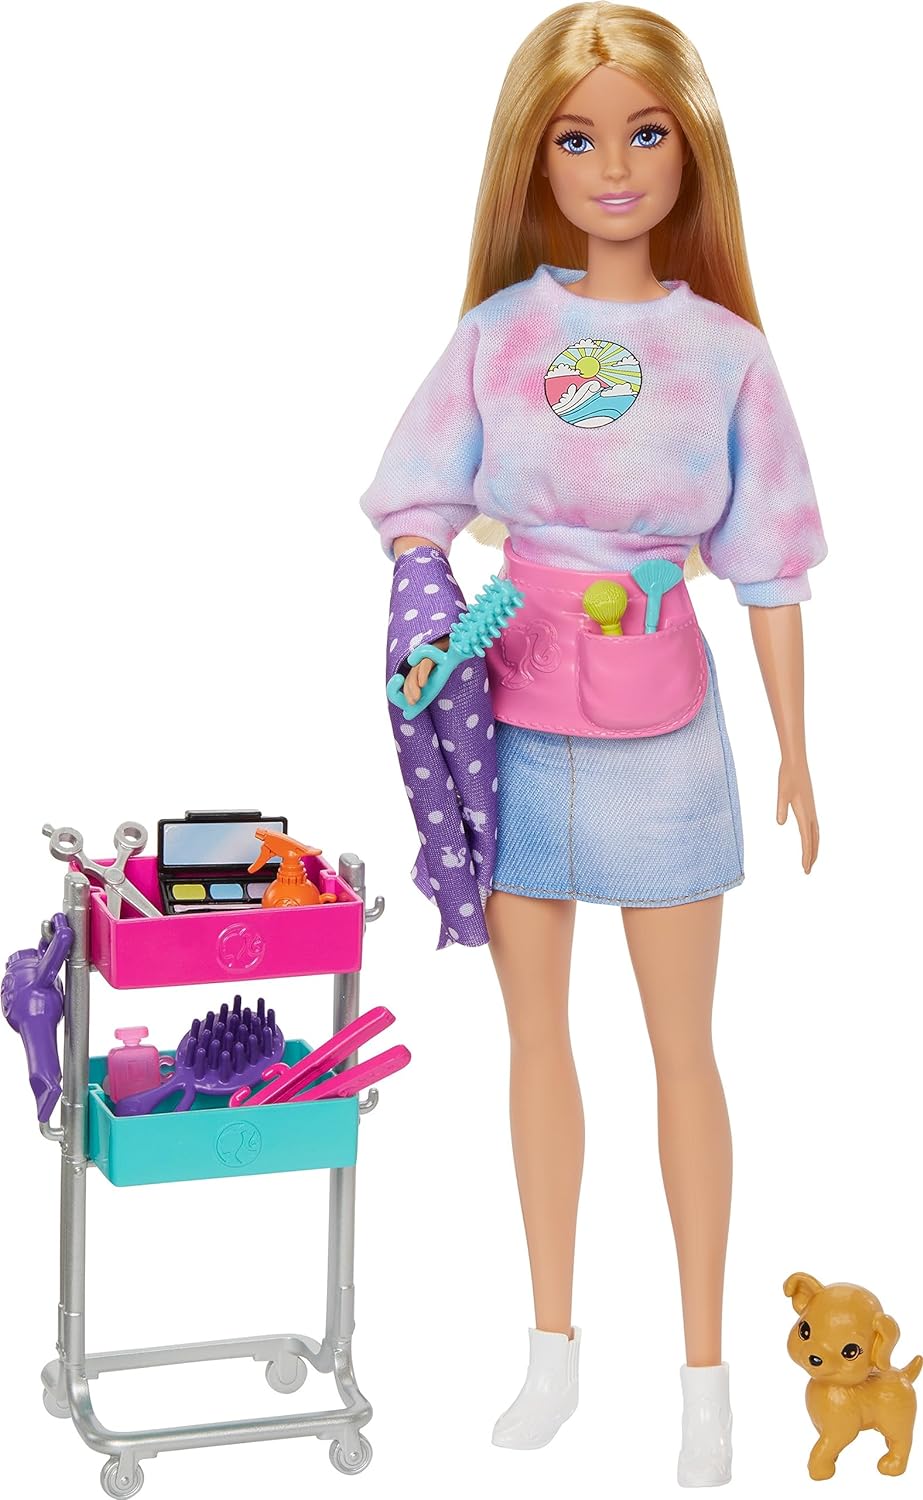 Barbie Malibu Stylist Doll & 14 Accessories Playset, Hair & Makeup Theme with Puppy & Styling Cart